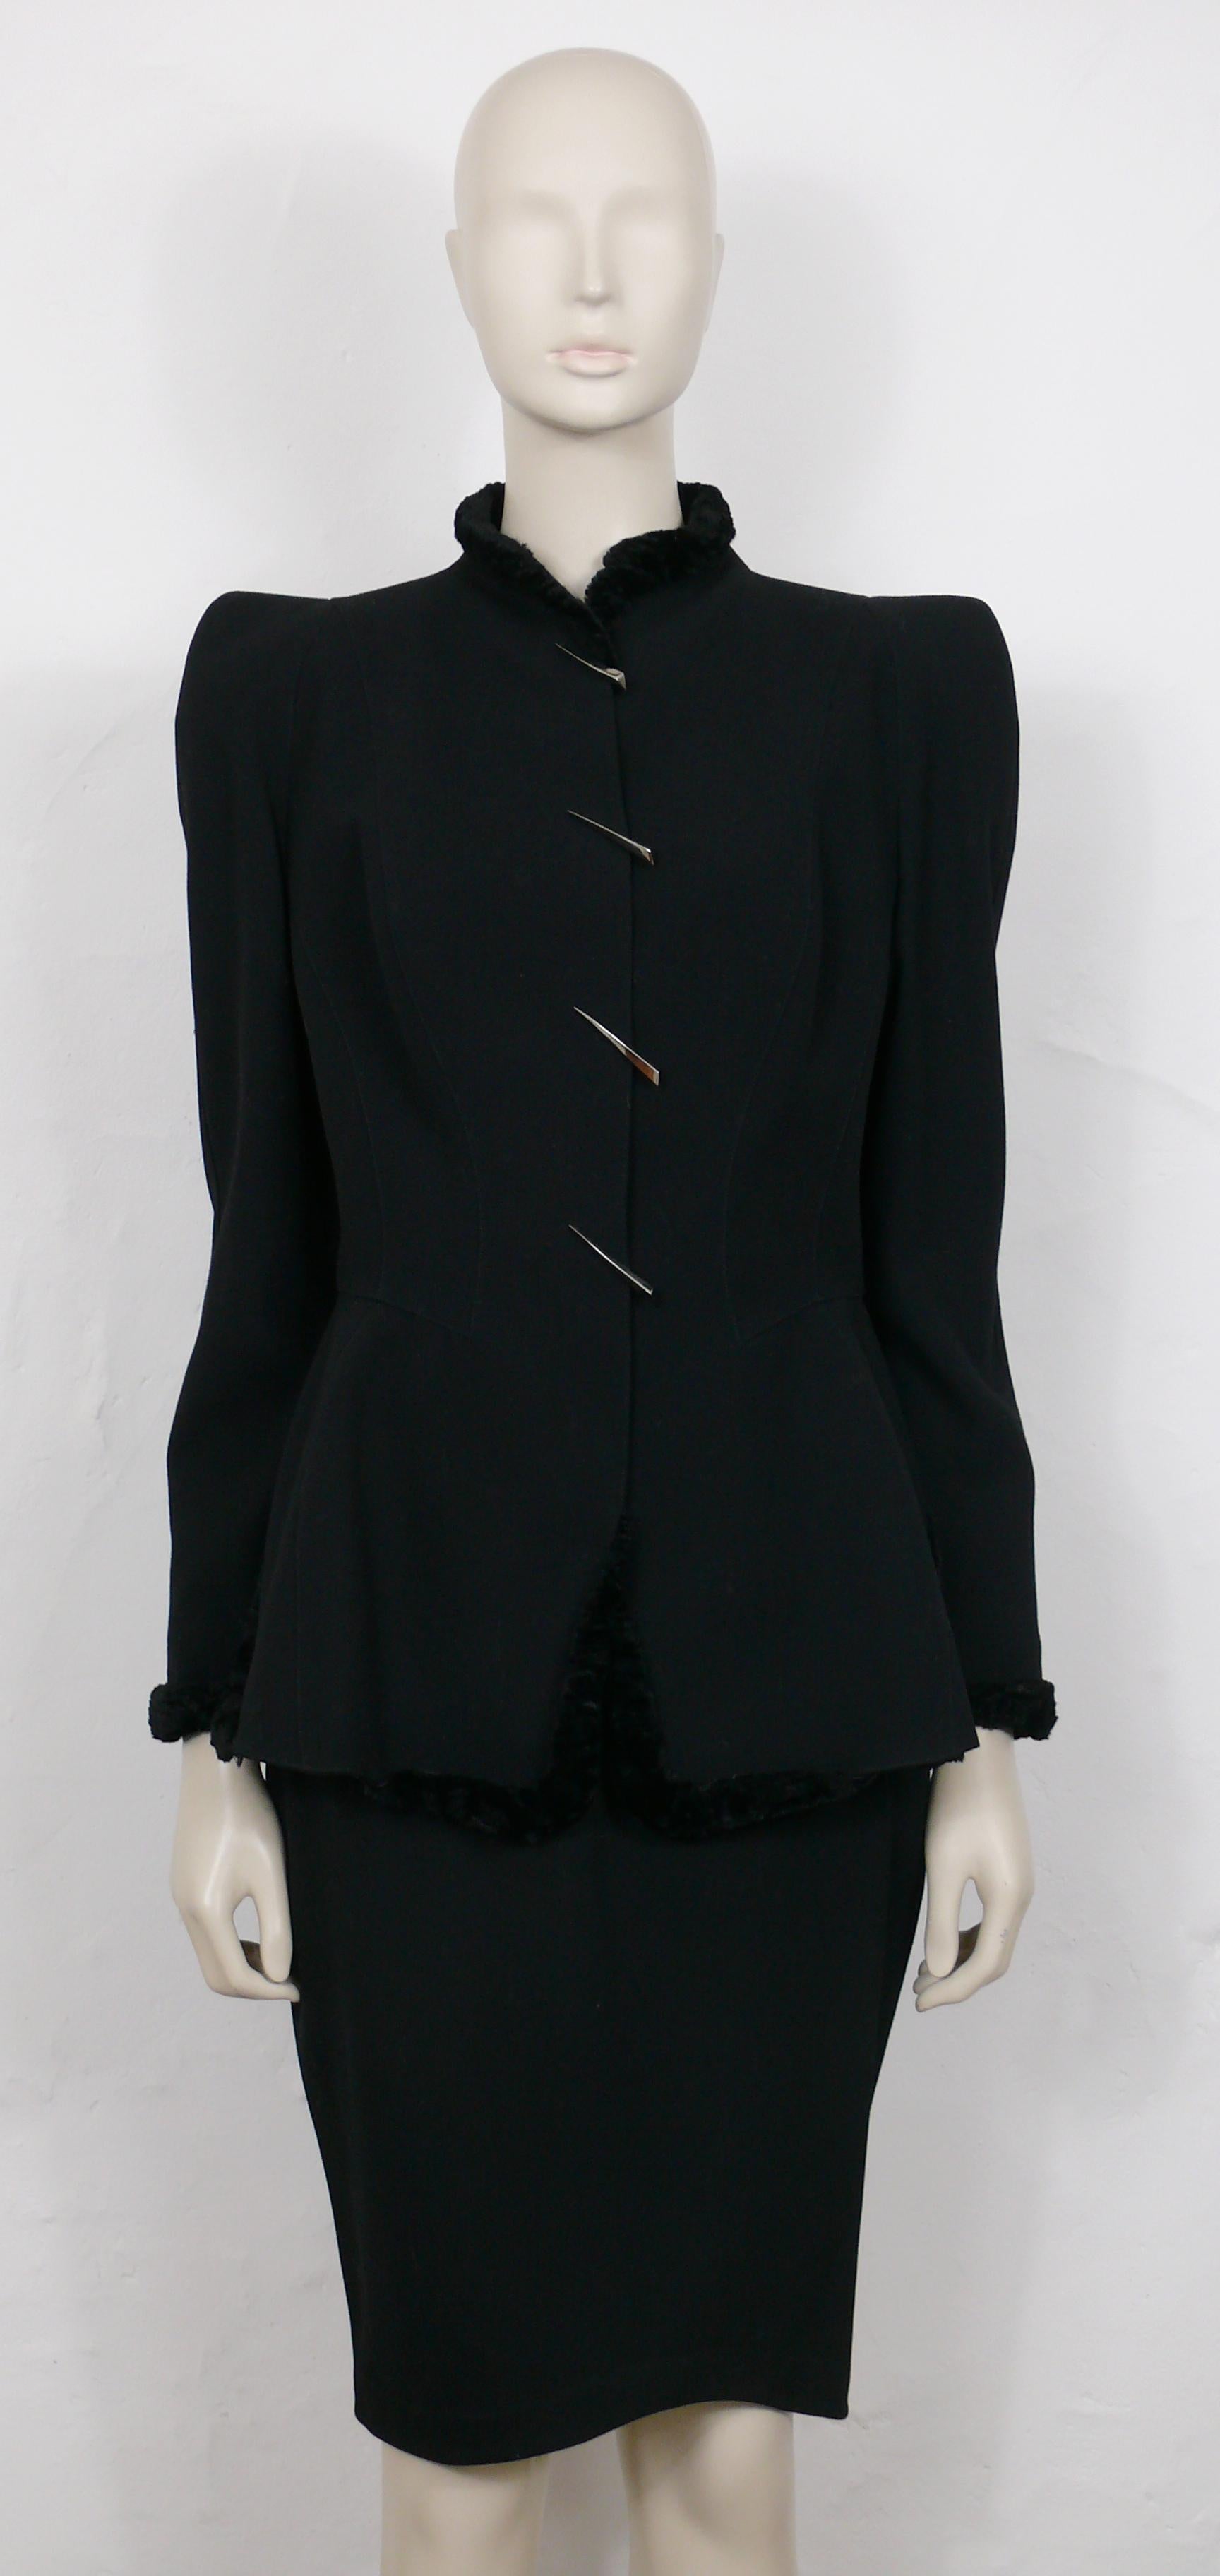 Thierry Mugler Vintage Black Wool & Claw Ornaments Skirt Suit For Sale 1